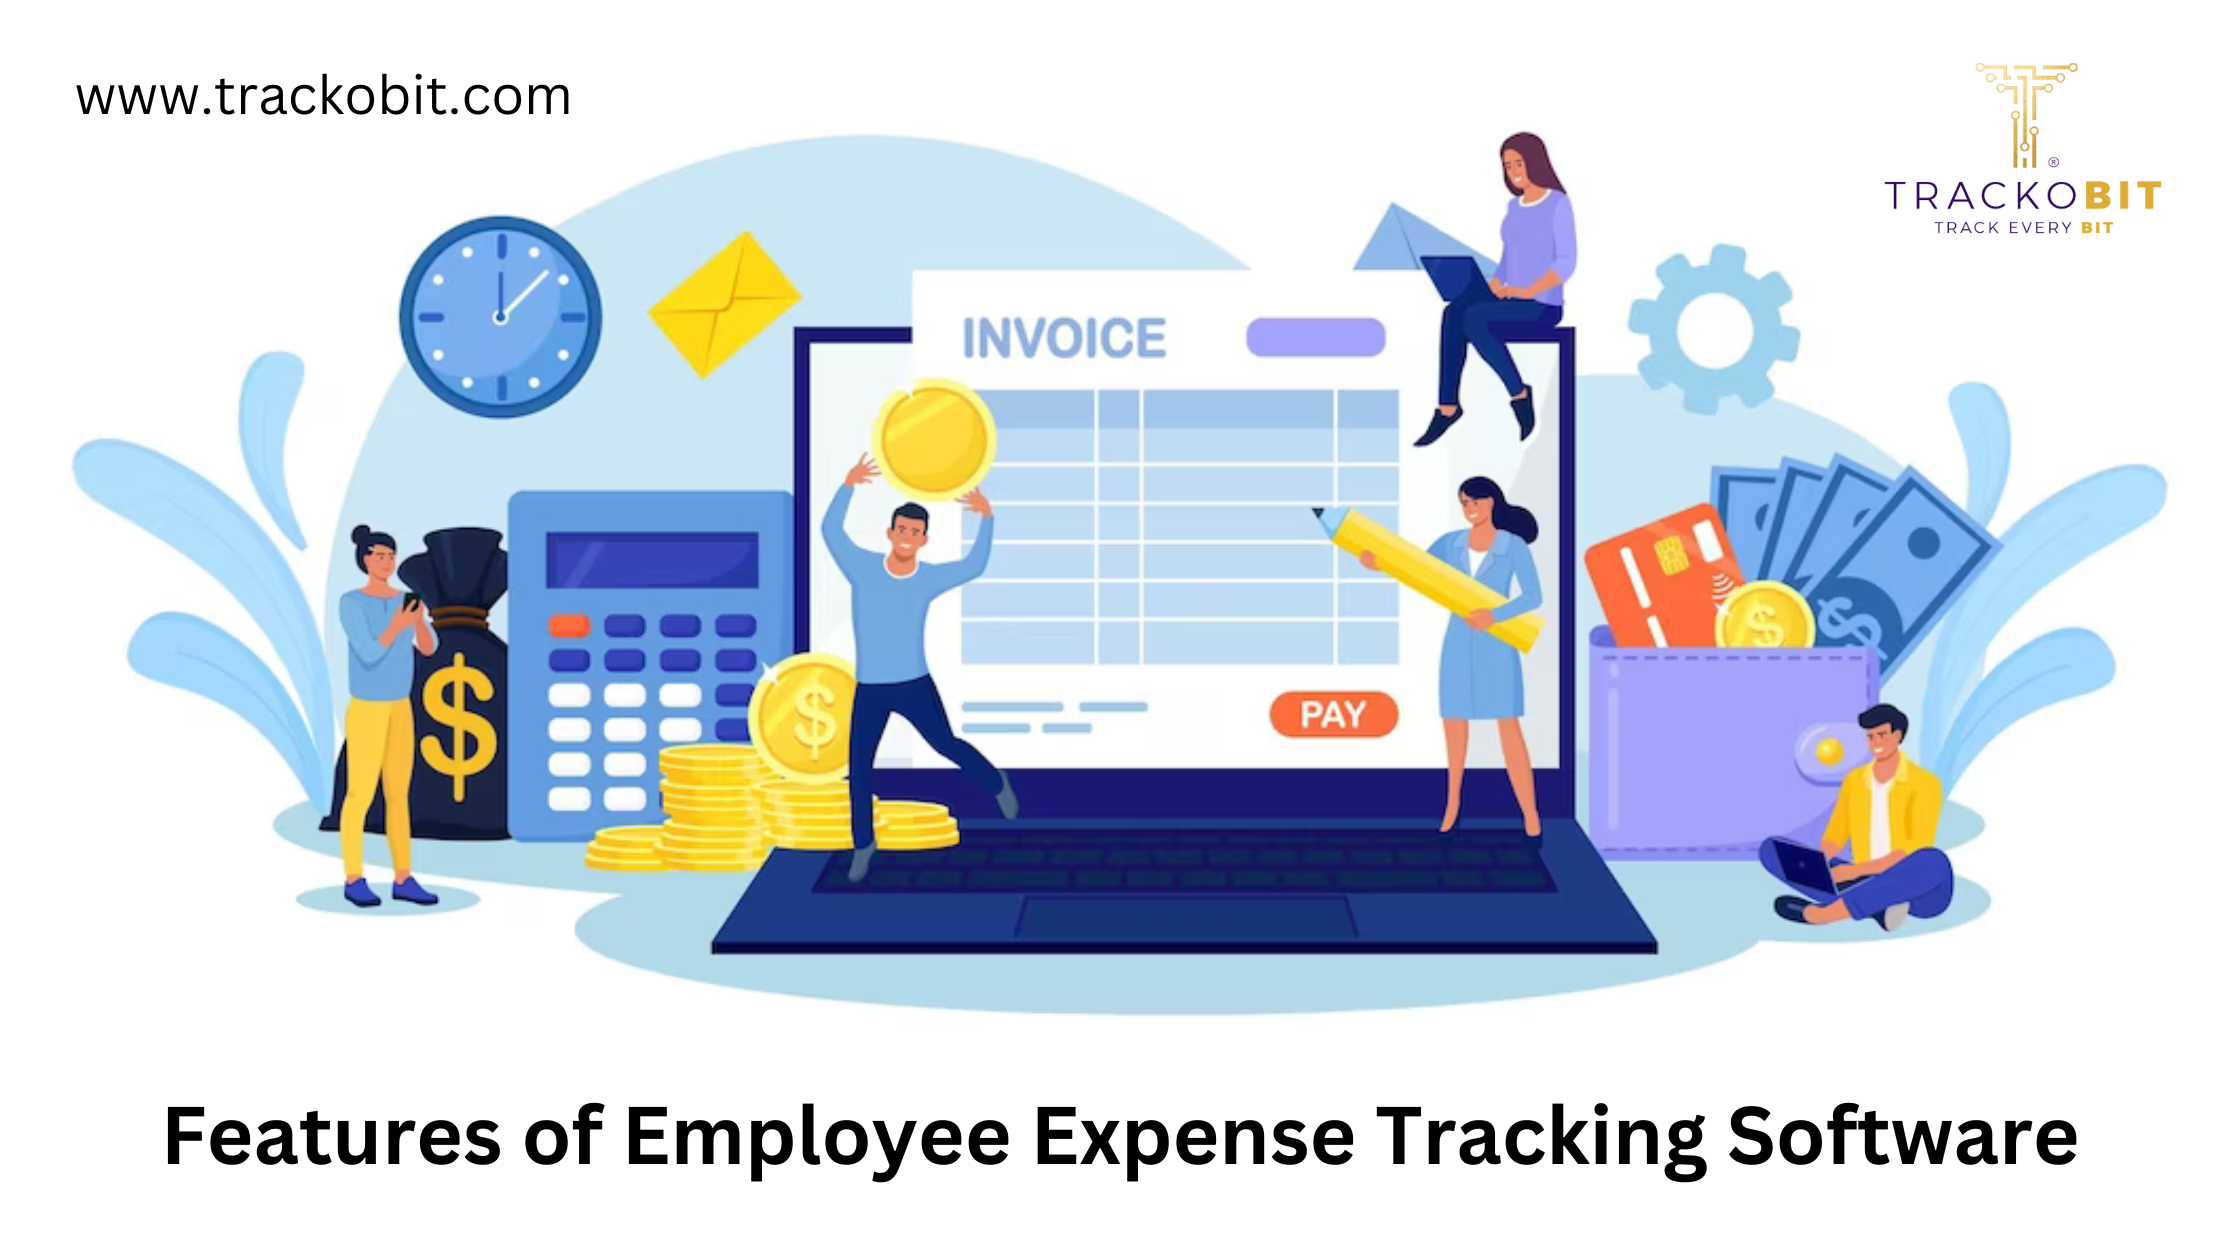 Features of Employee Expense Tracking Software